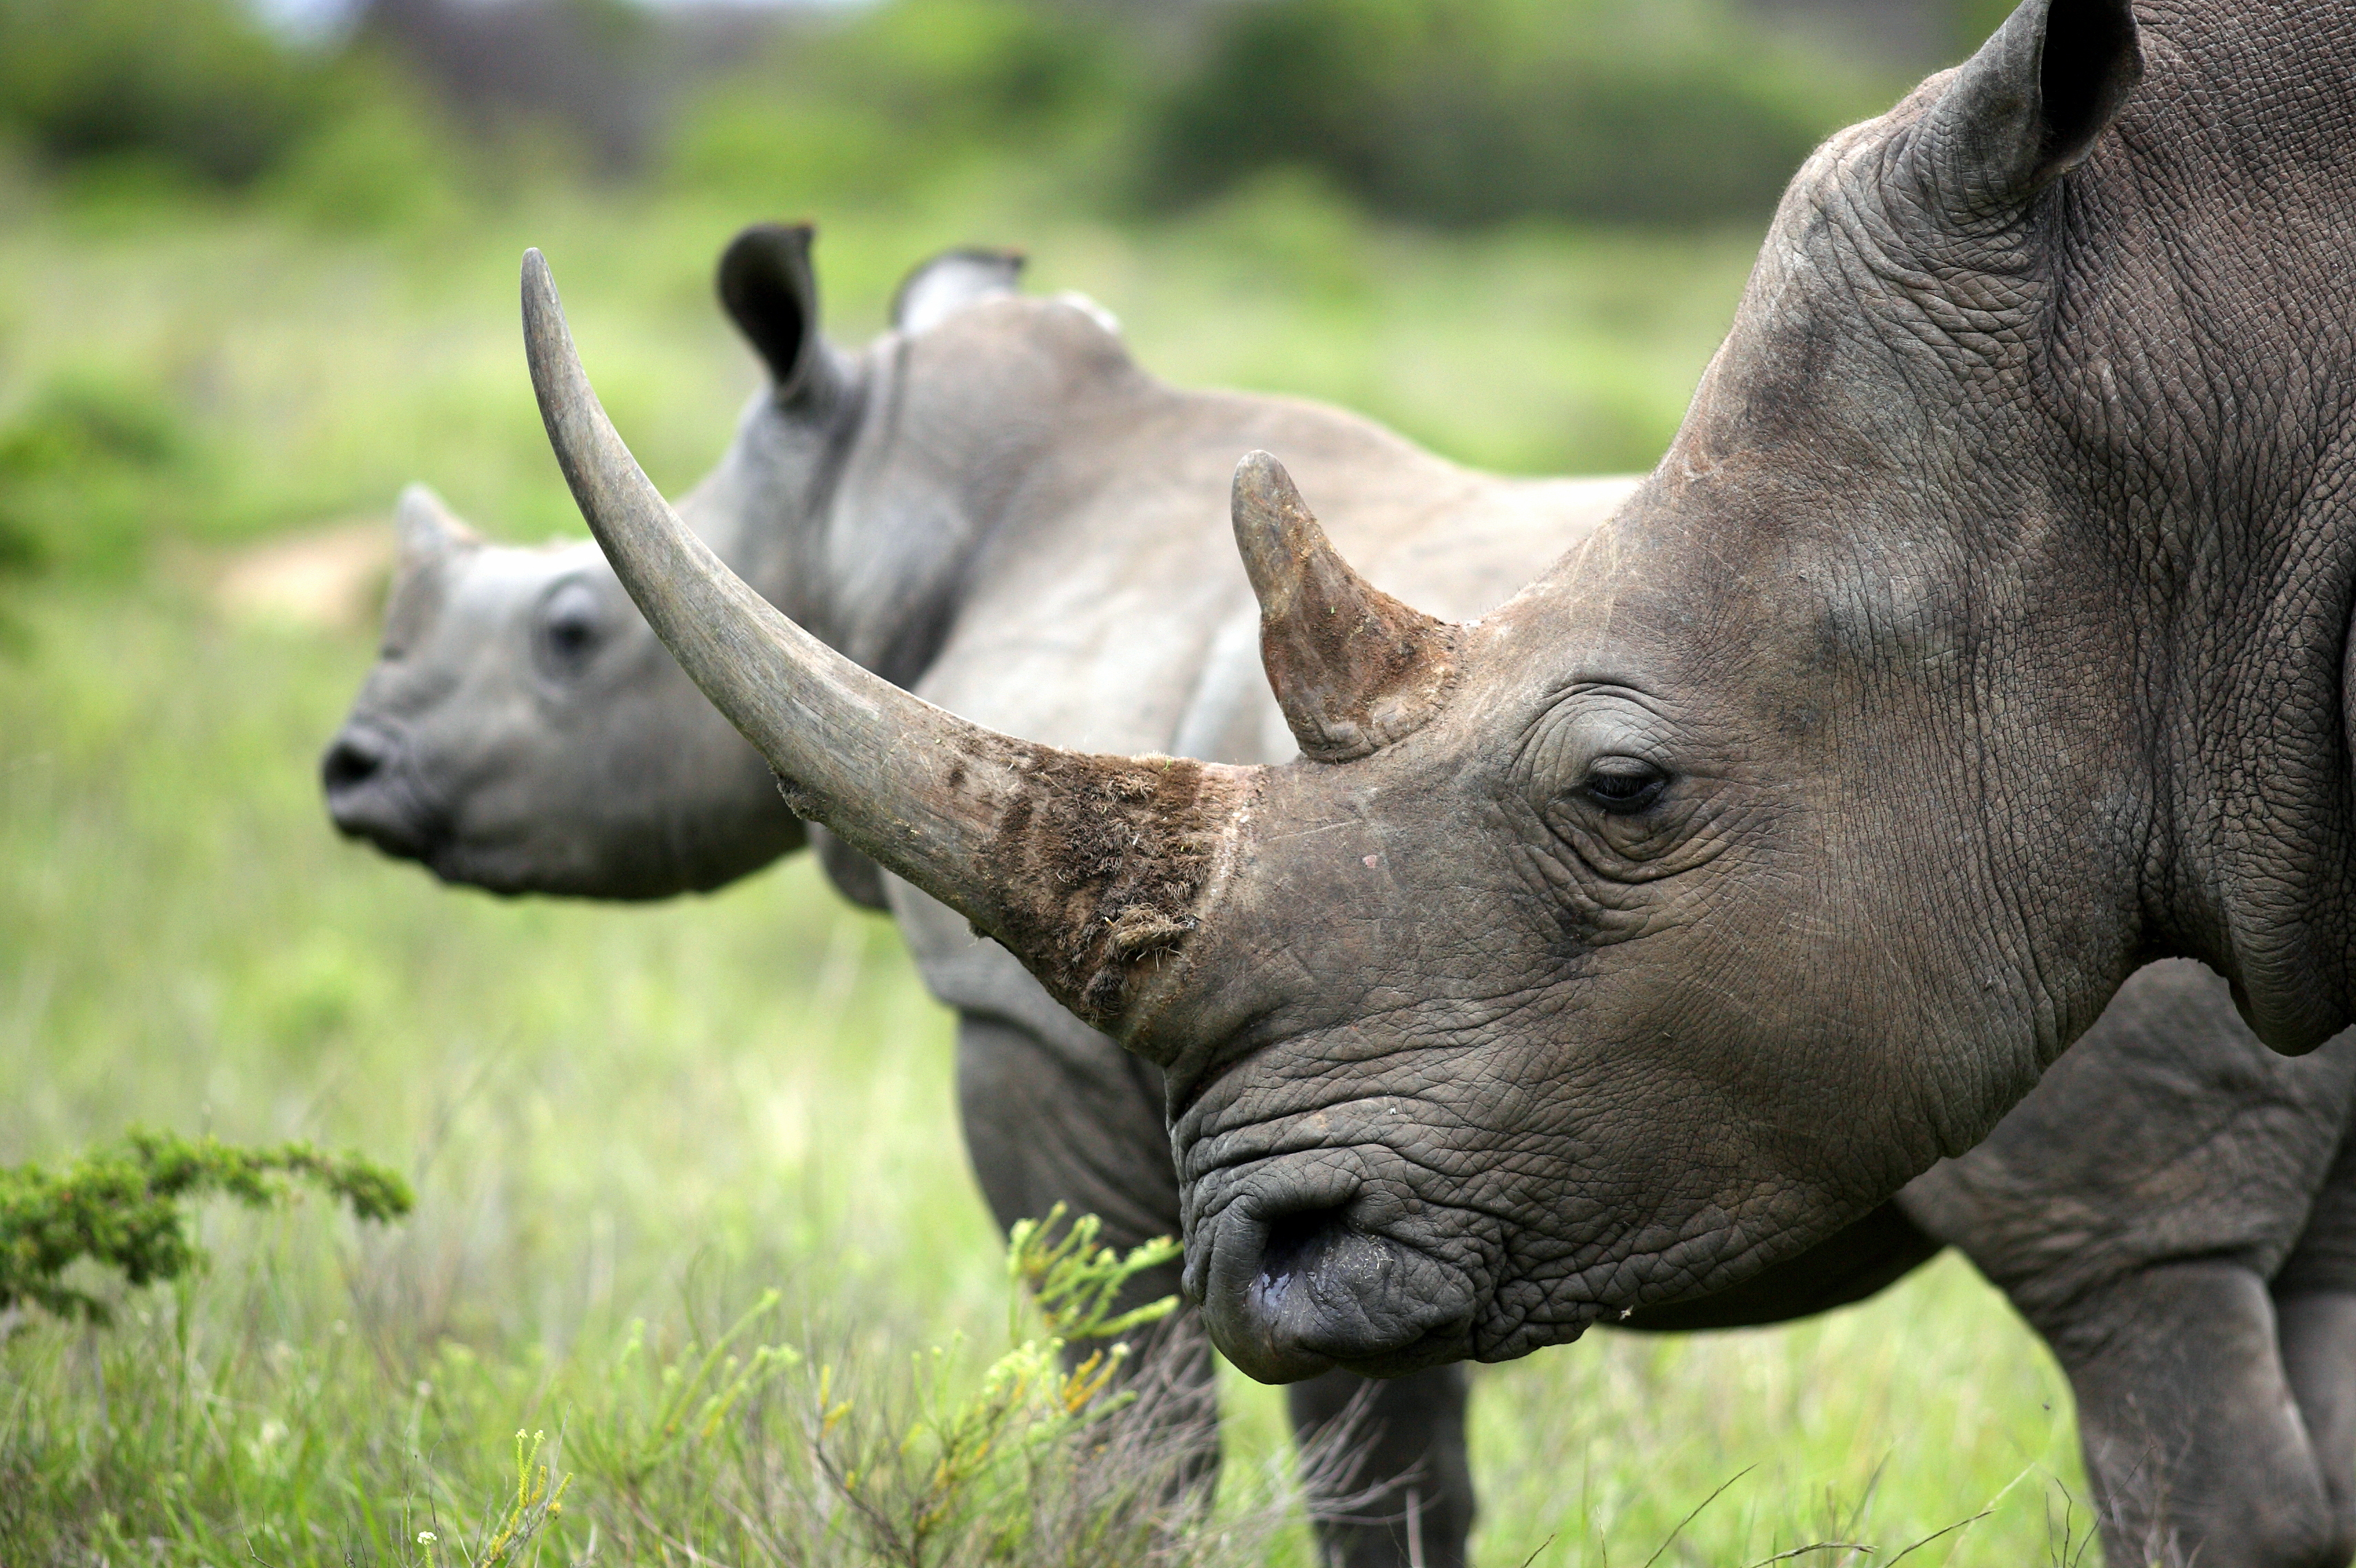 What protein is a Rhinos horn made of?